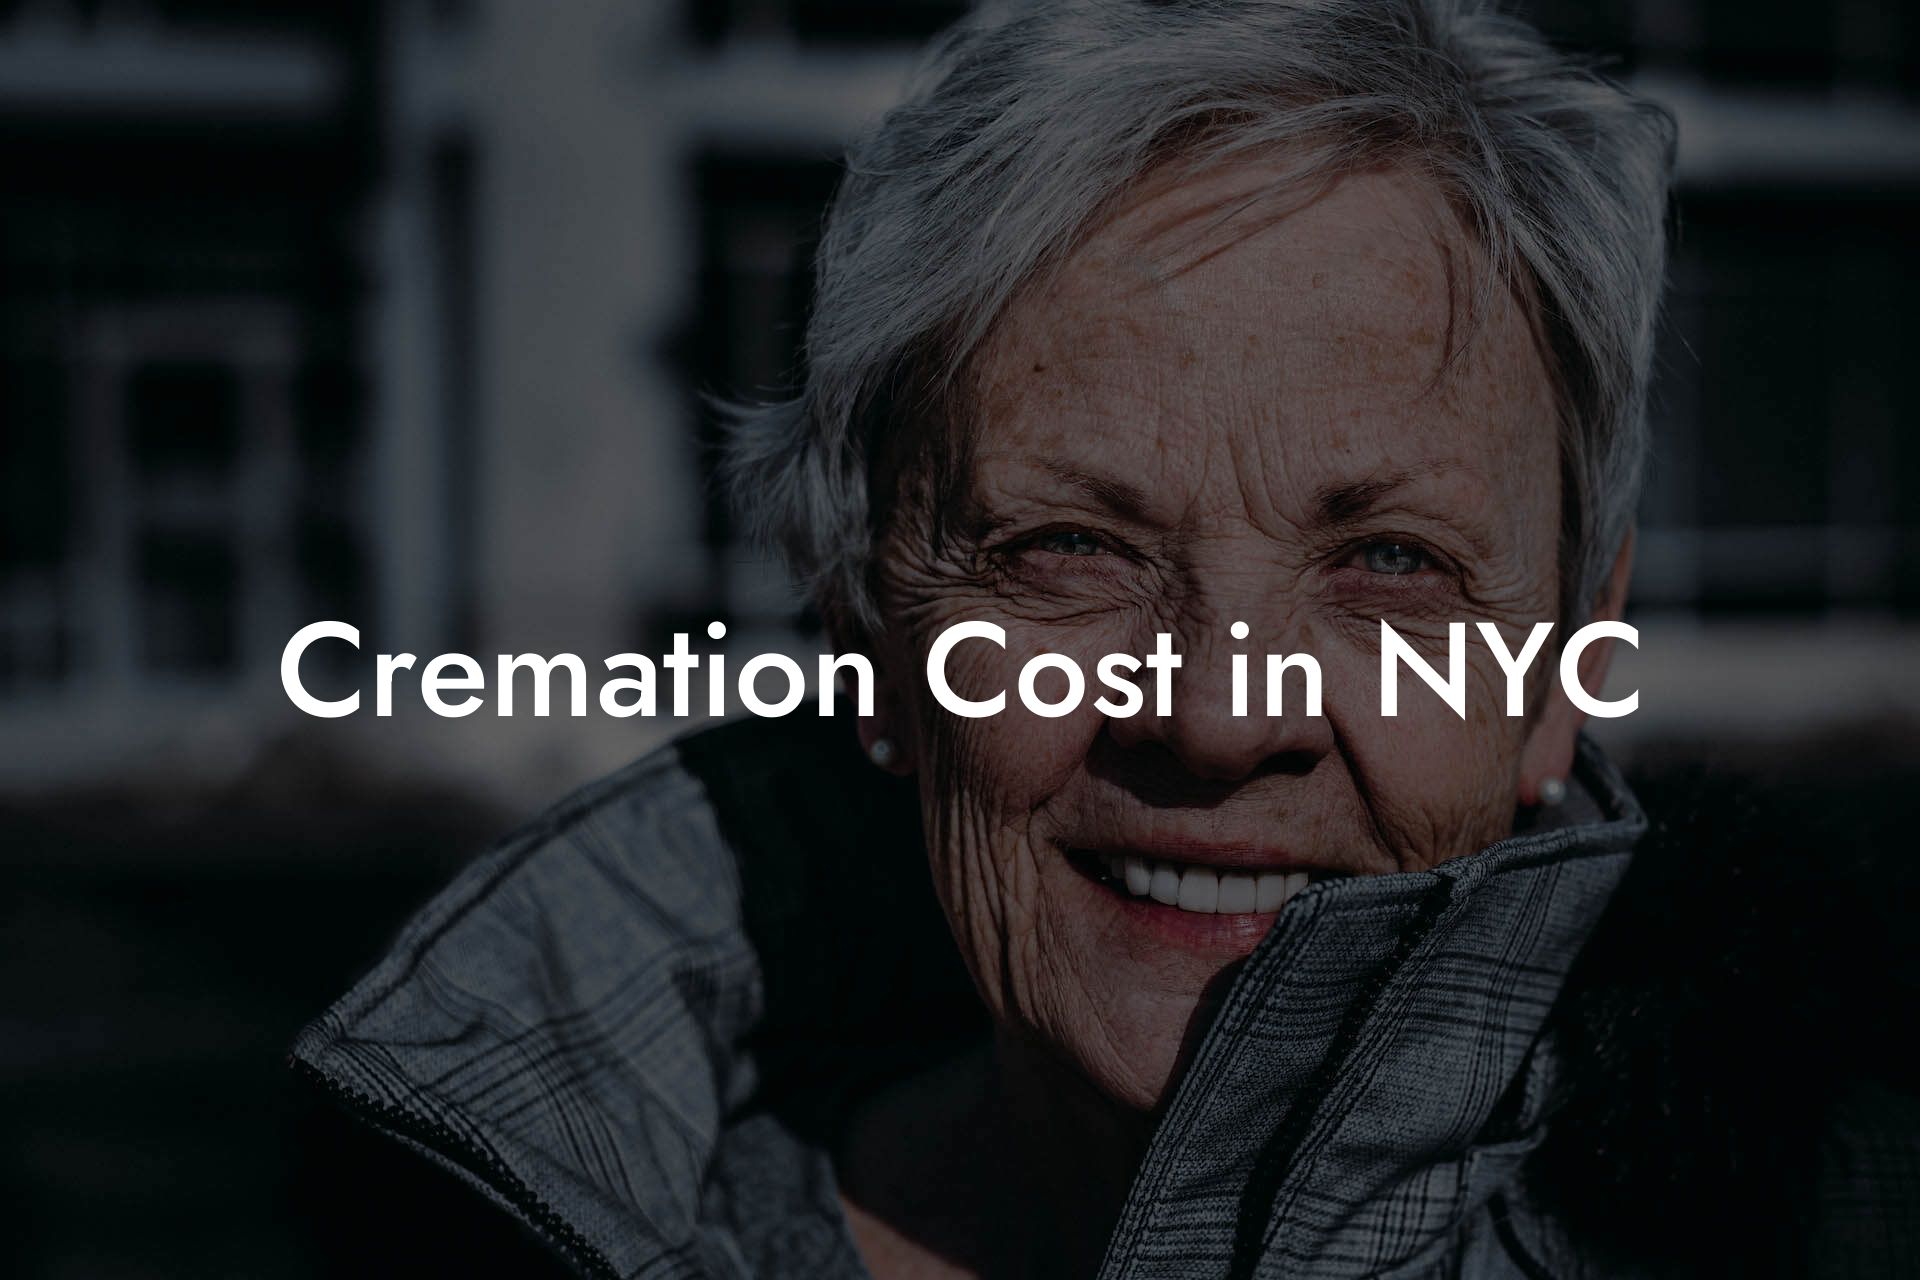 Cremation Cost in NYC